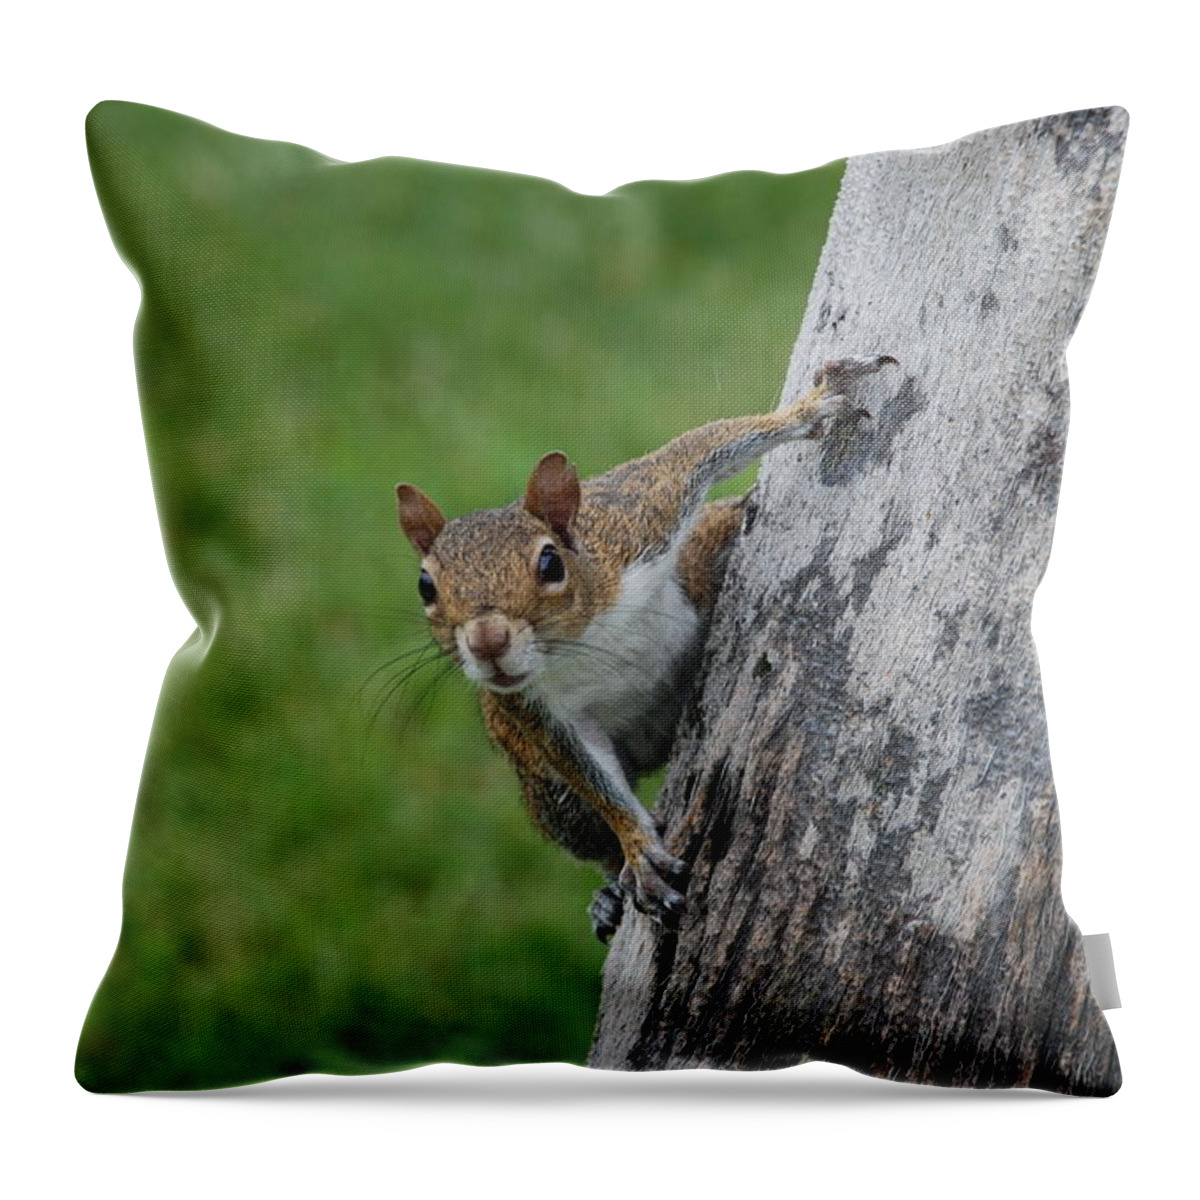 Squirrel Throw Pillow featuring the photograph Hanging On by Rob Hans